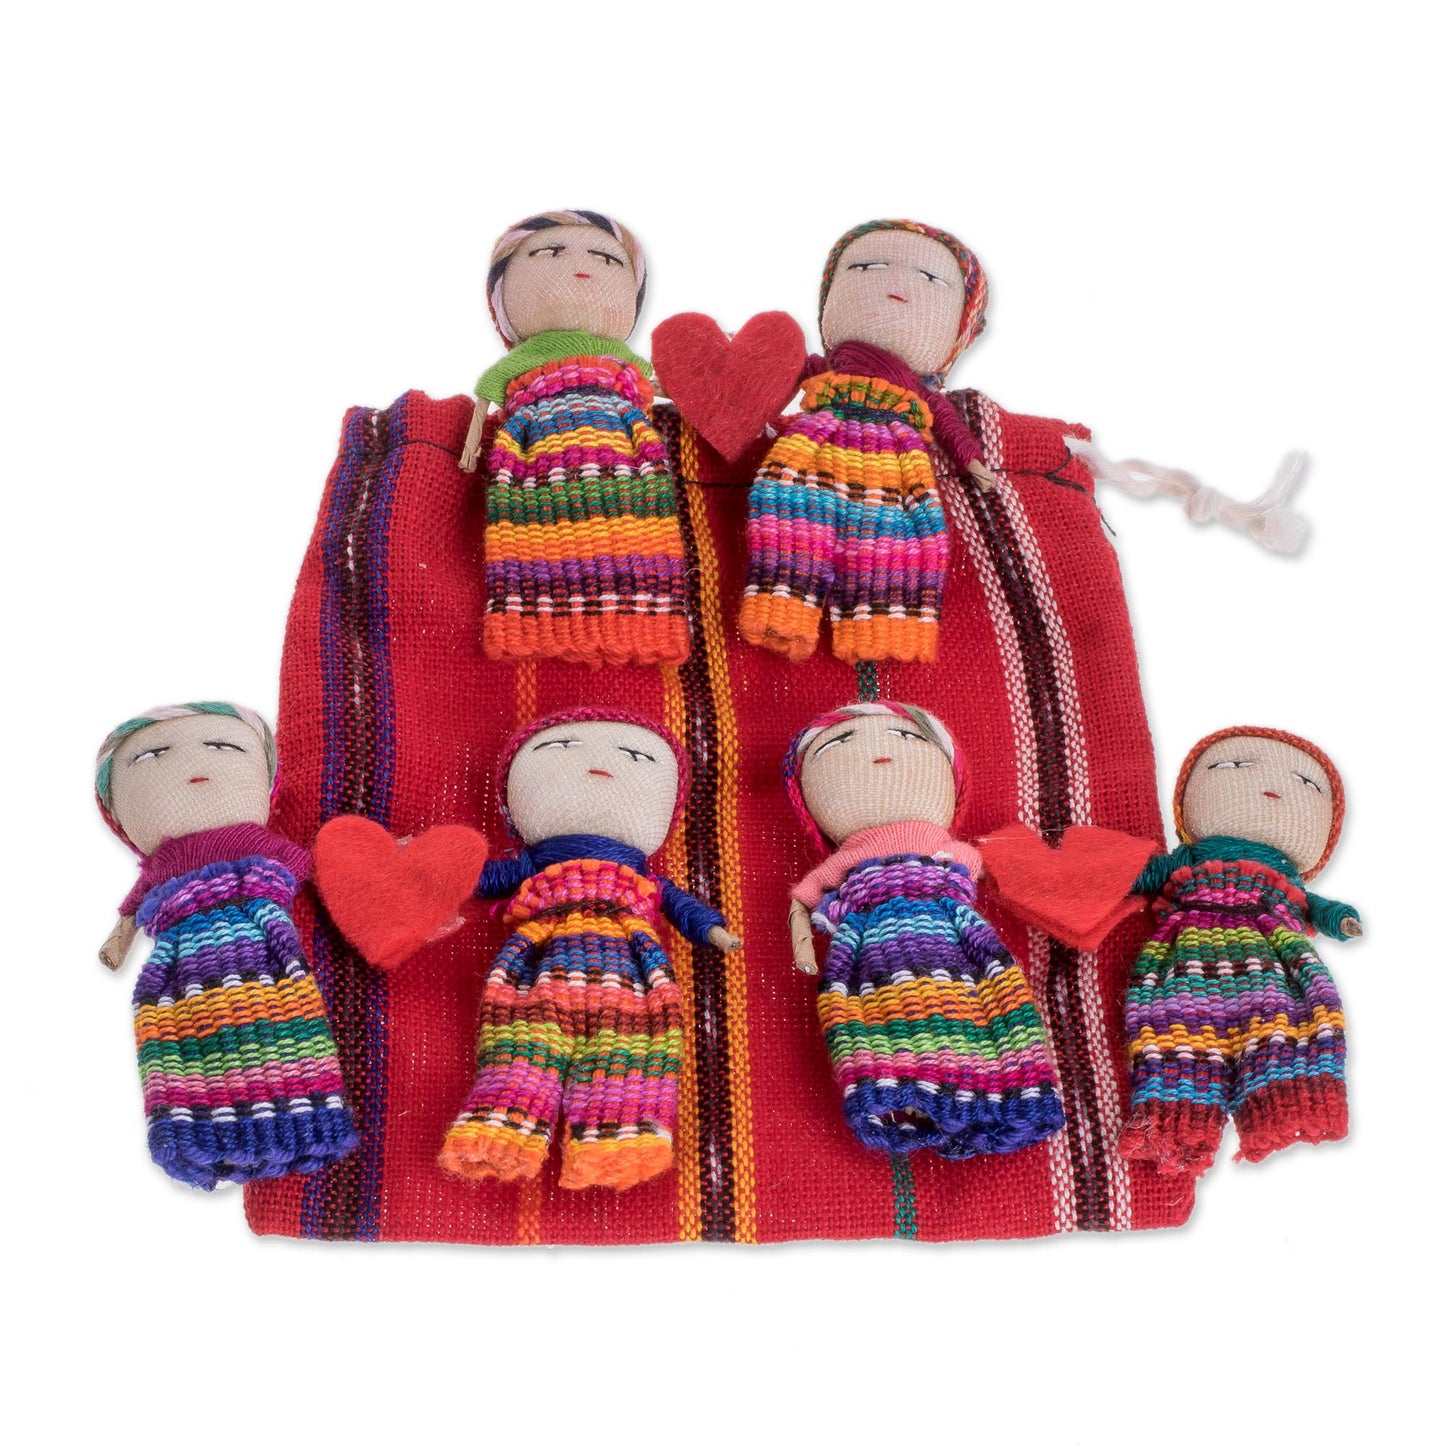 Love & Hope Worry Dolls with Hearts